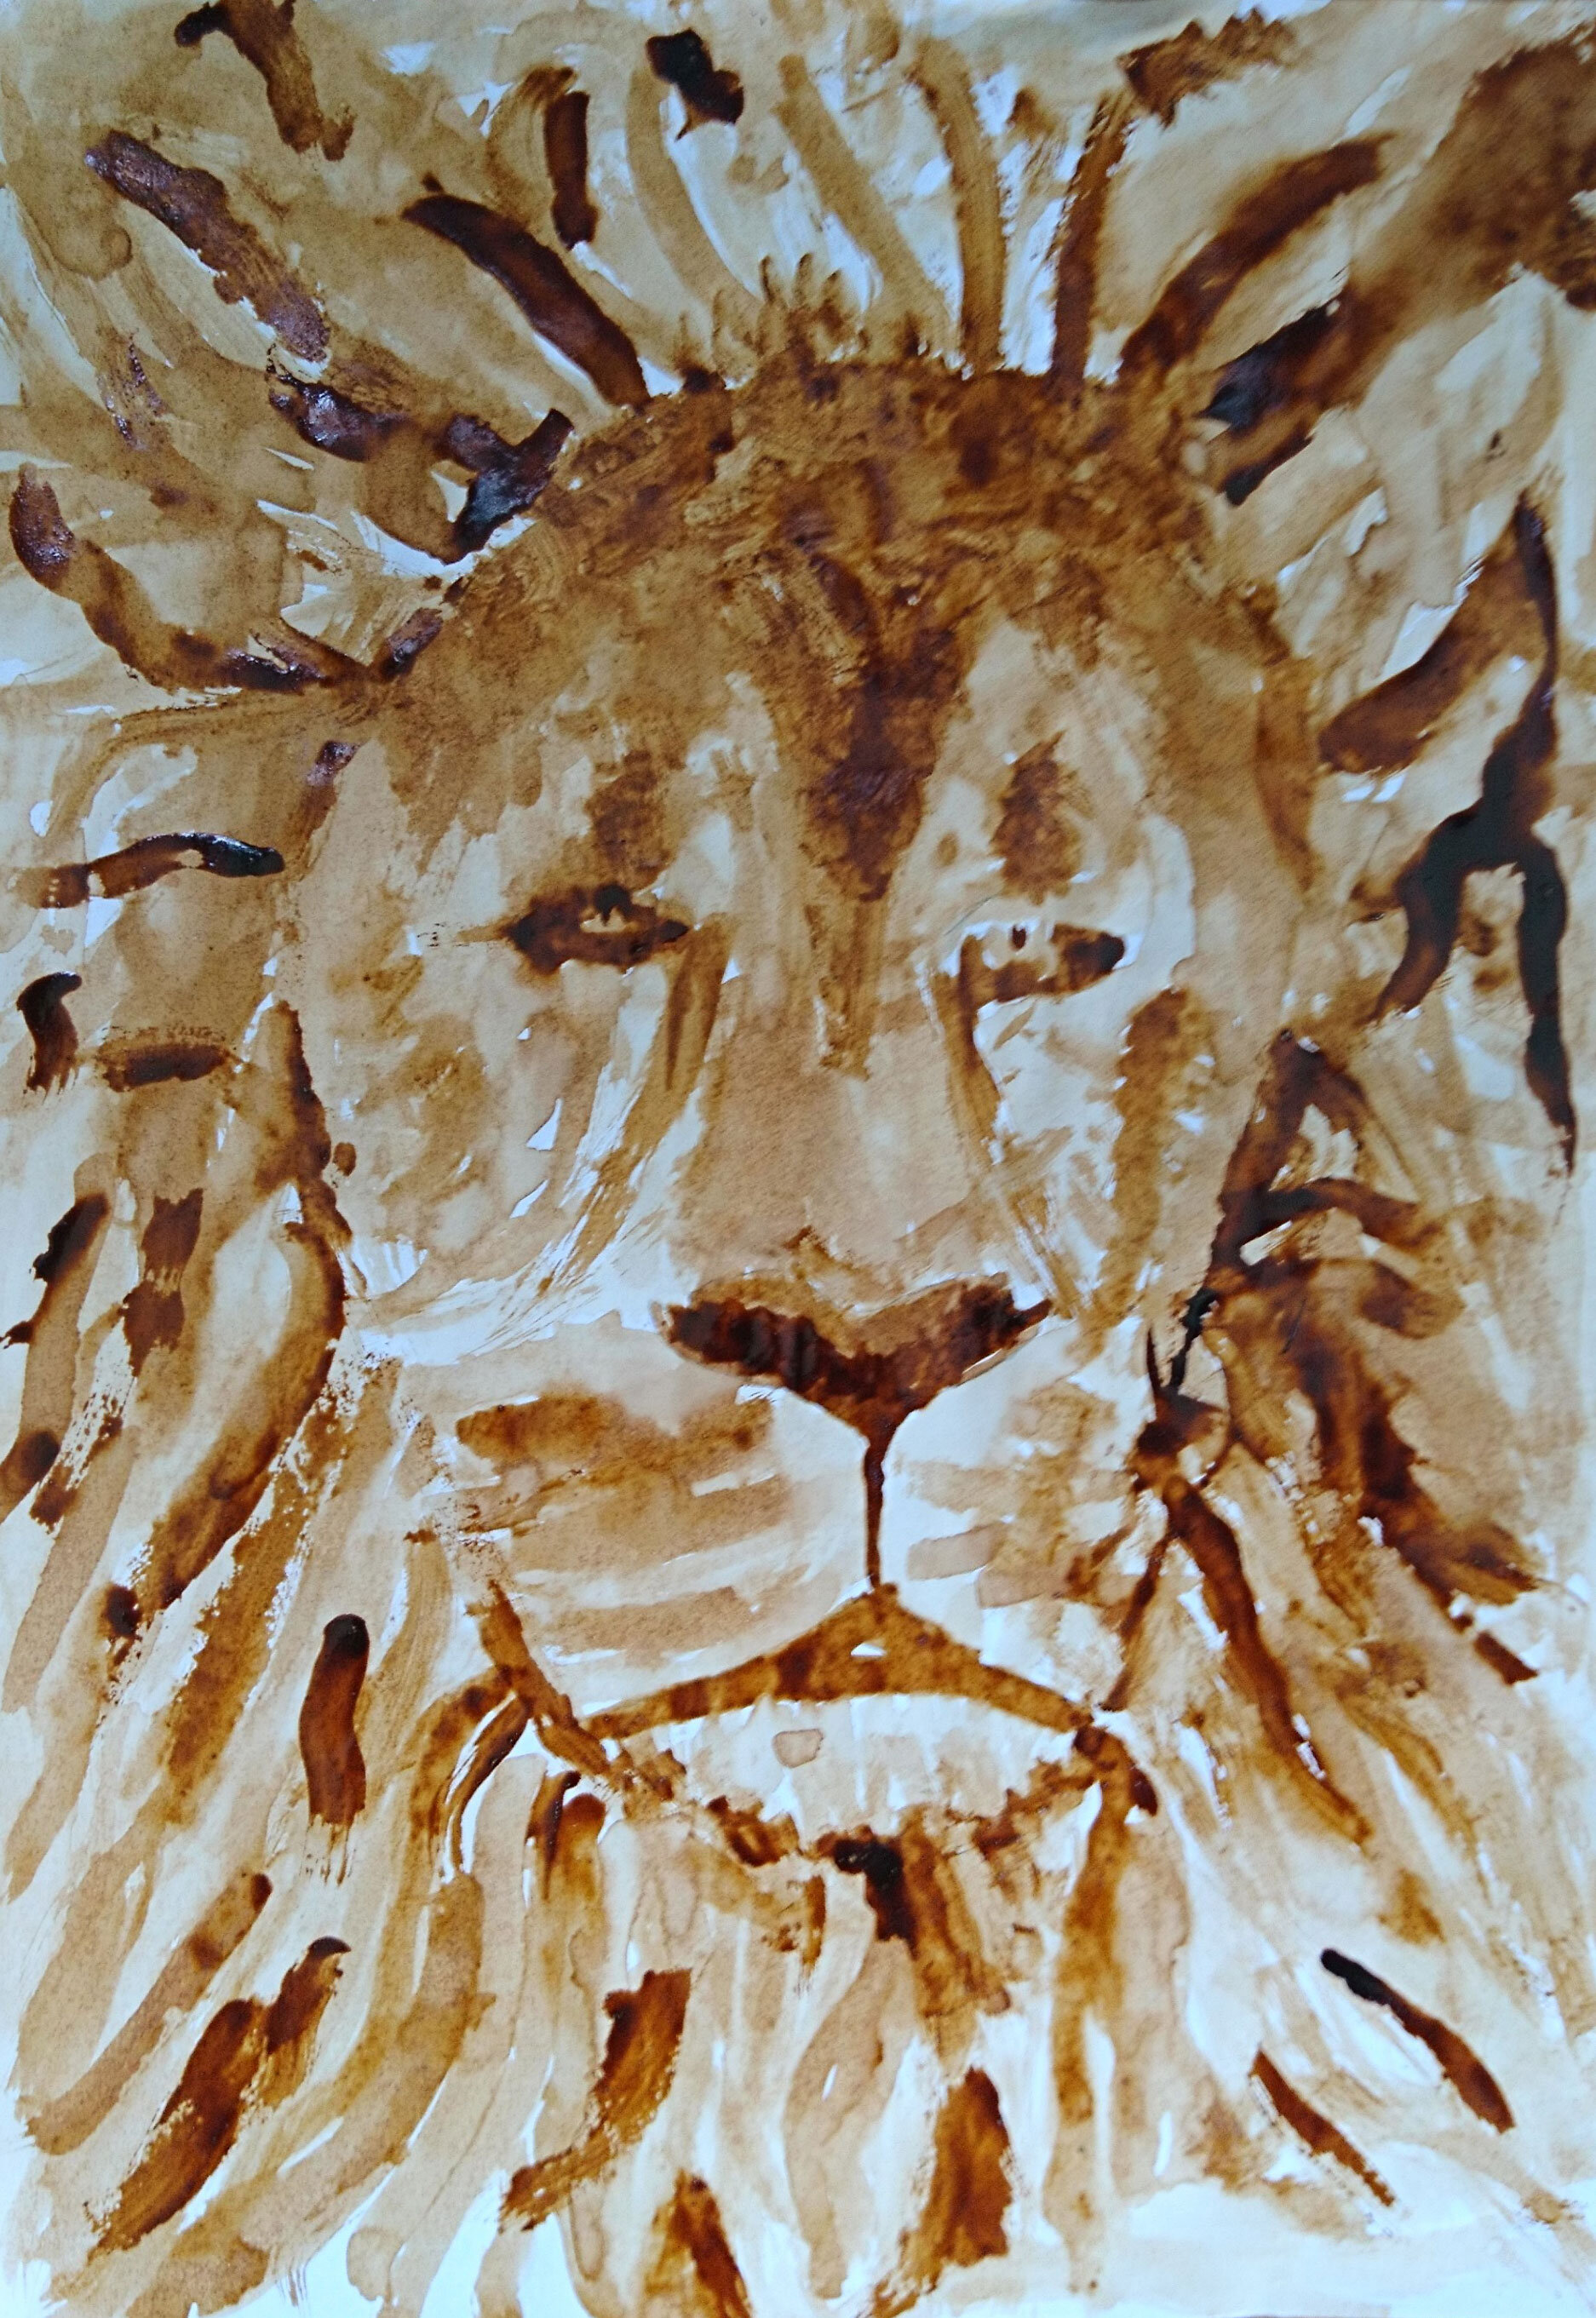 King of the Jungle by Archie Rendall age 9